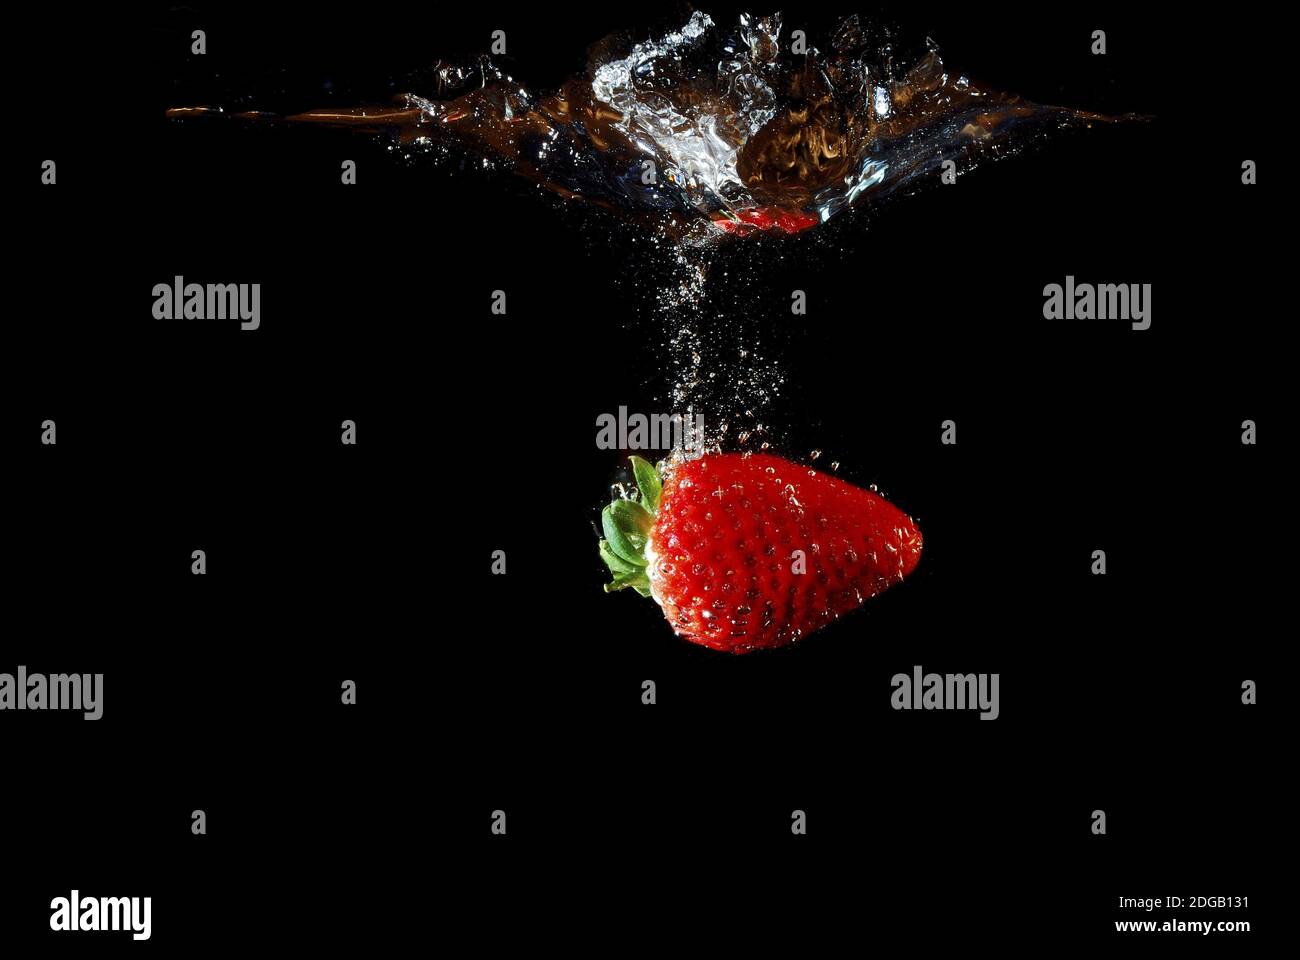 Fresh healthy strawberry falling into water and injected and produced bubbles with black background Stock Photo